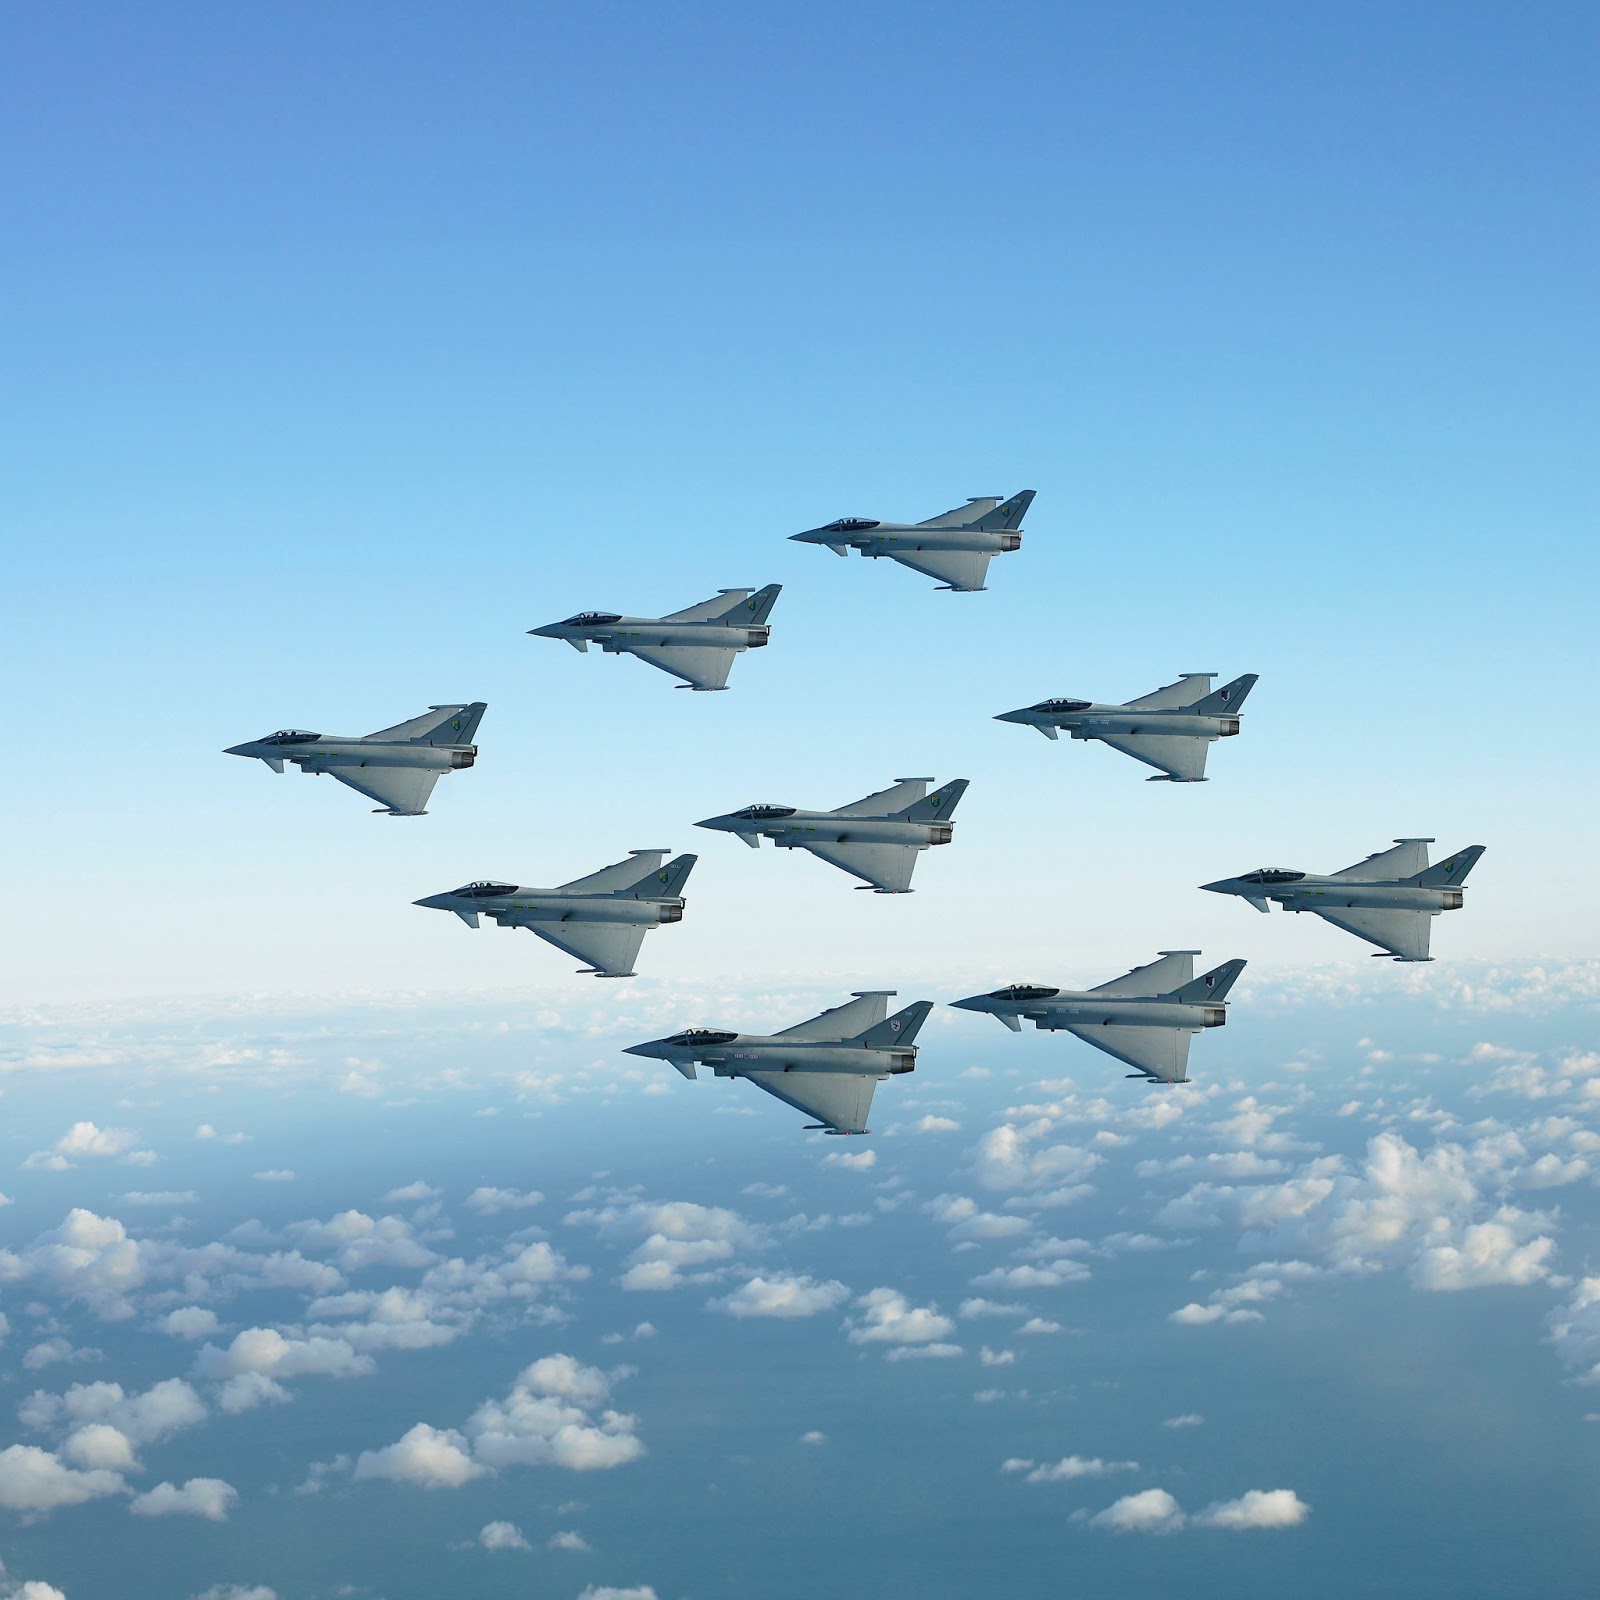 2-raf-first-typhoon-diamond-nine-formation-with-3-17-and-29-sqns-based-at-raf-coningsby.jpg